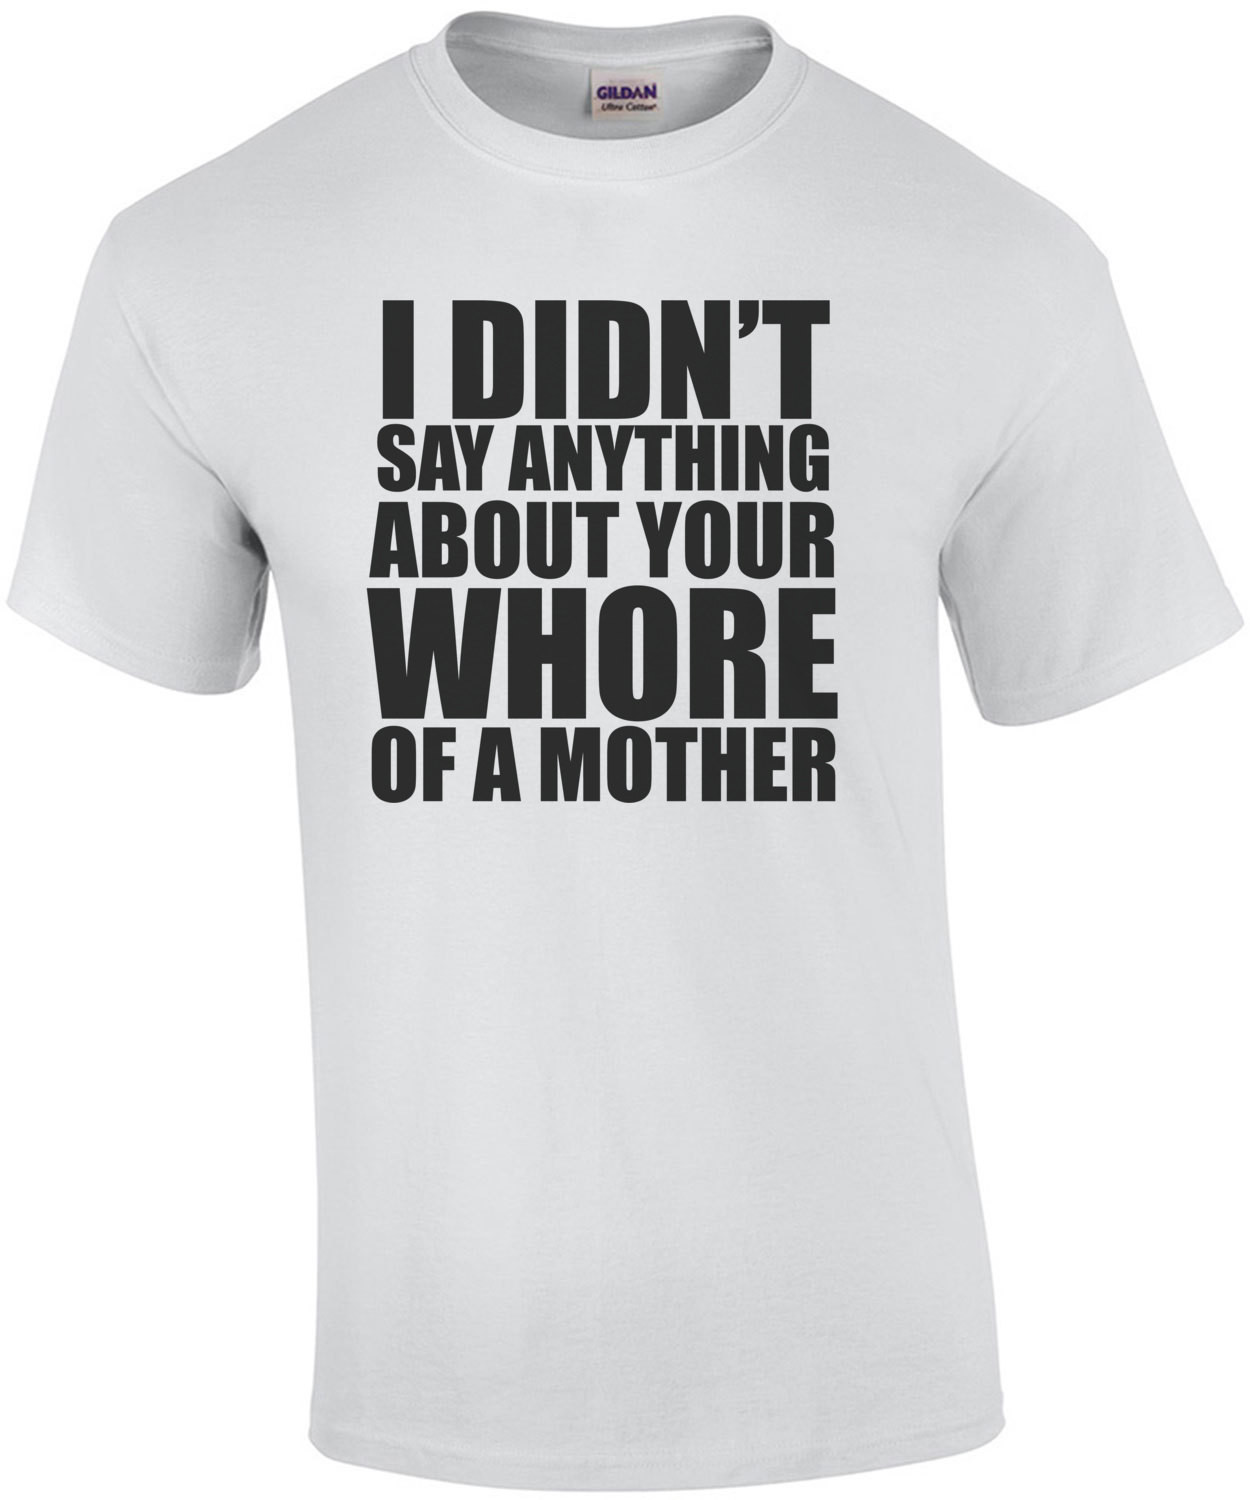 I didn't say anything about your whore of a mother - insult t-shirt